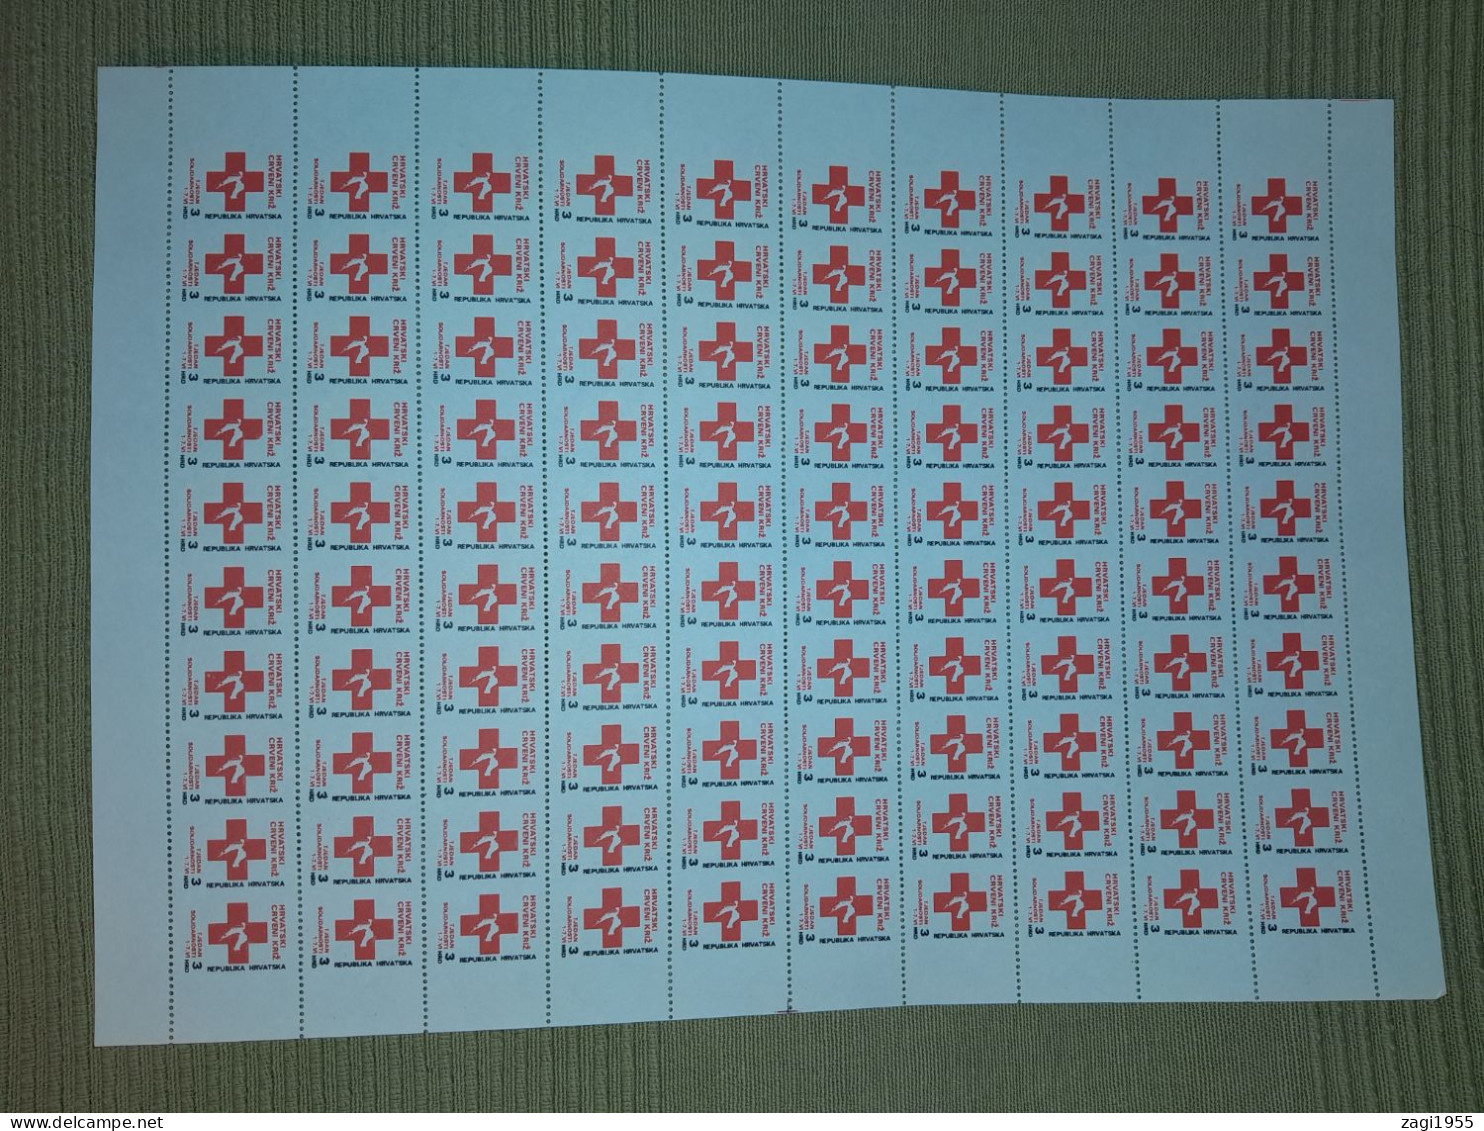 Croatia 1992 Sheet Red Cross Solidarity One Half IMPERFORATED, Perforated Only Horisontally - Kroatië